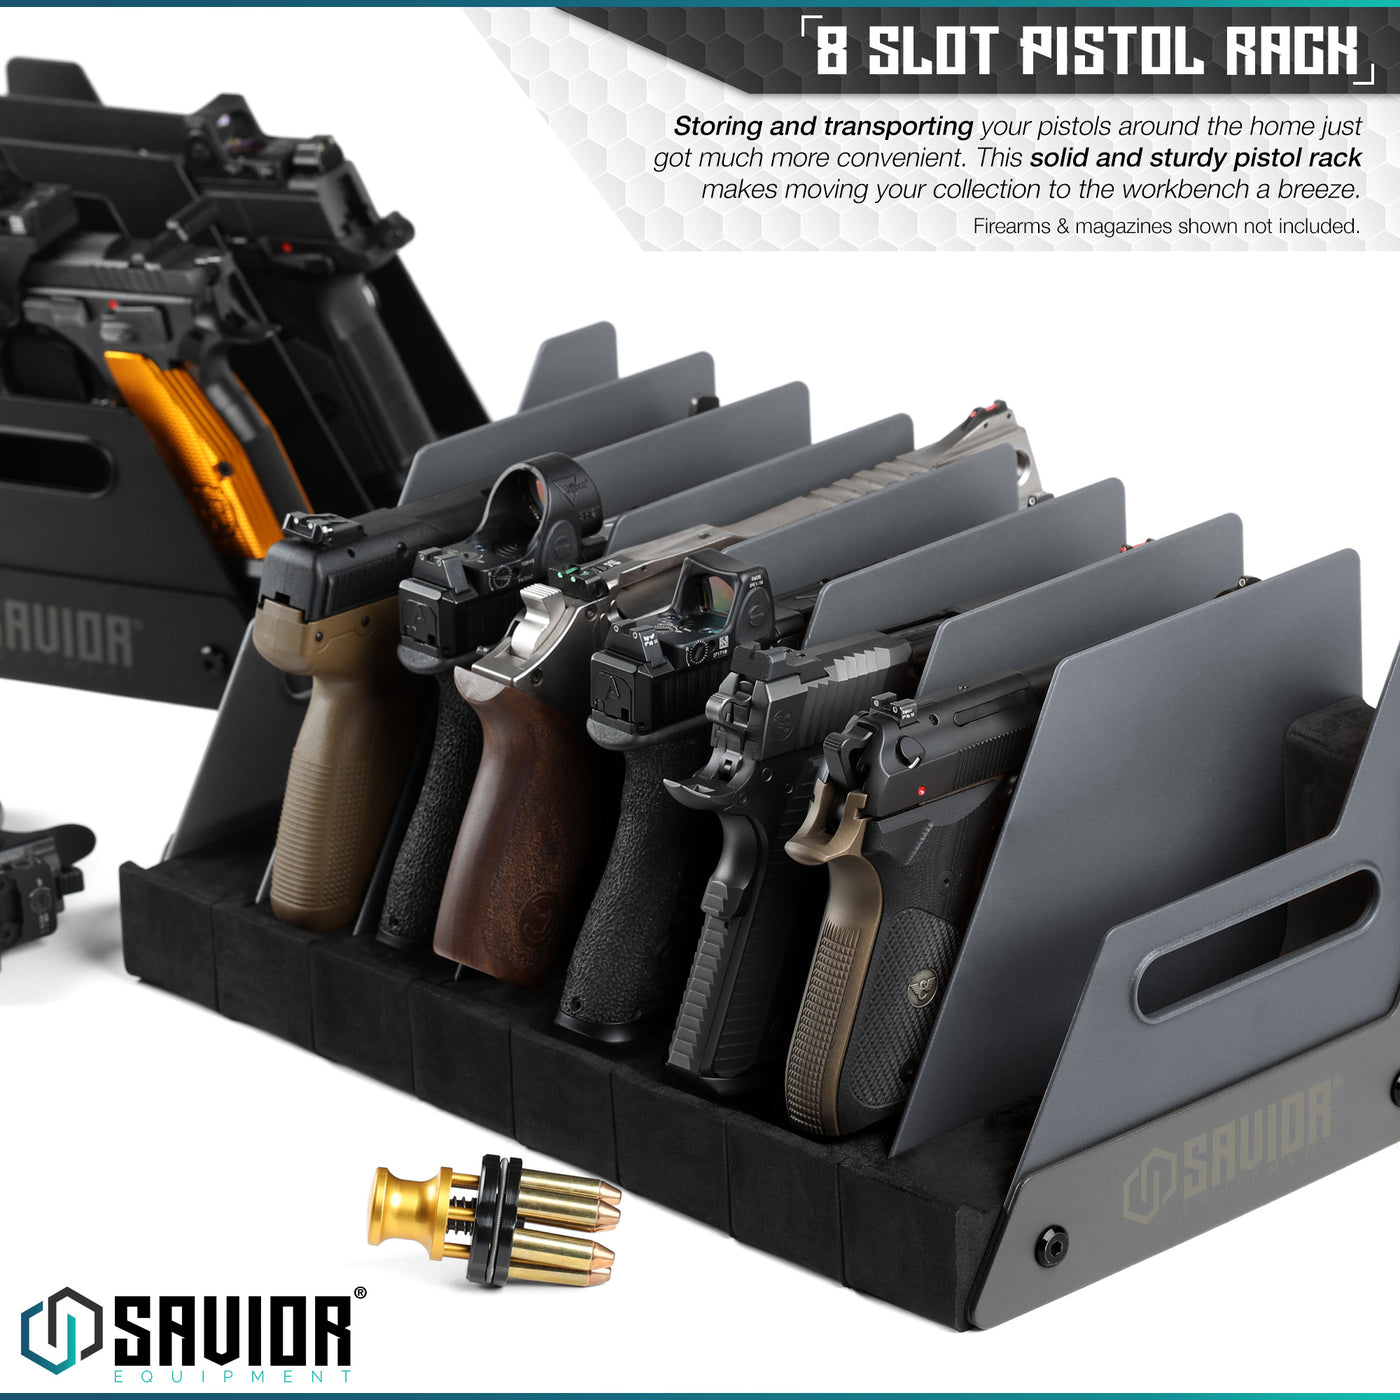 4 / 8 / 12 Slot Pistol Rack - Storing and transporting your pistols around the home just got much more convenient. This solid and sturdy pistol rack makes moving your collection to the workbench a breeze. Firearms & accessories shown not included.